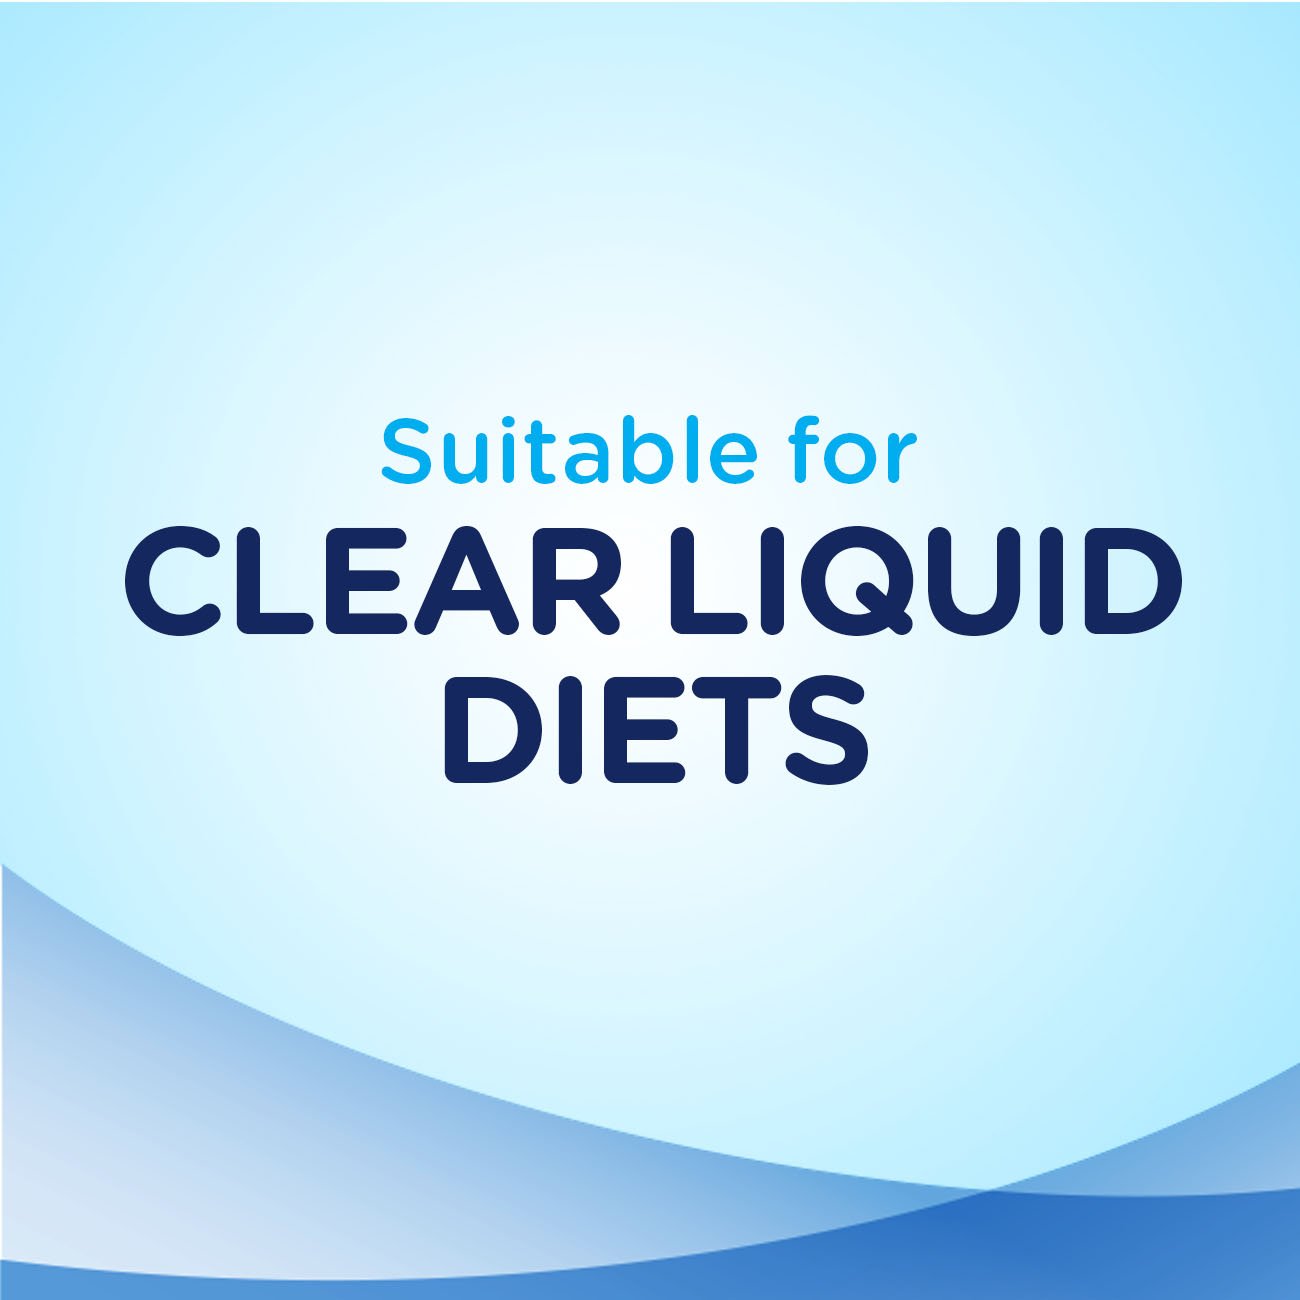 Ensure Clear Nutrition Drink, 0g fat, 8g of protein, Mixed Fruit, 10 Fl Oz (Pack of 12)